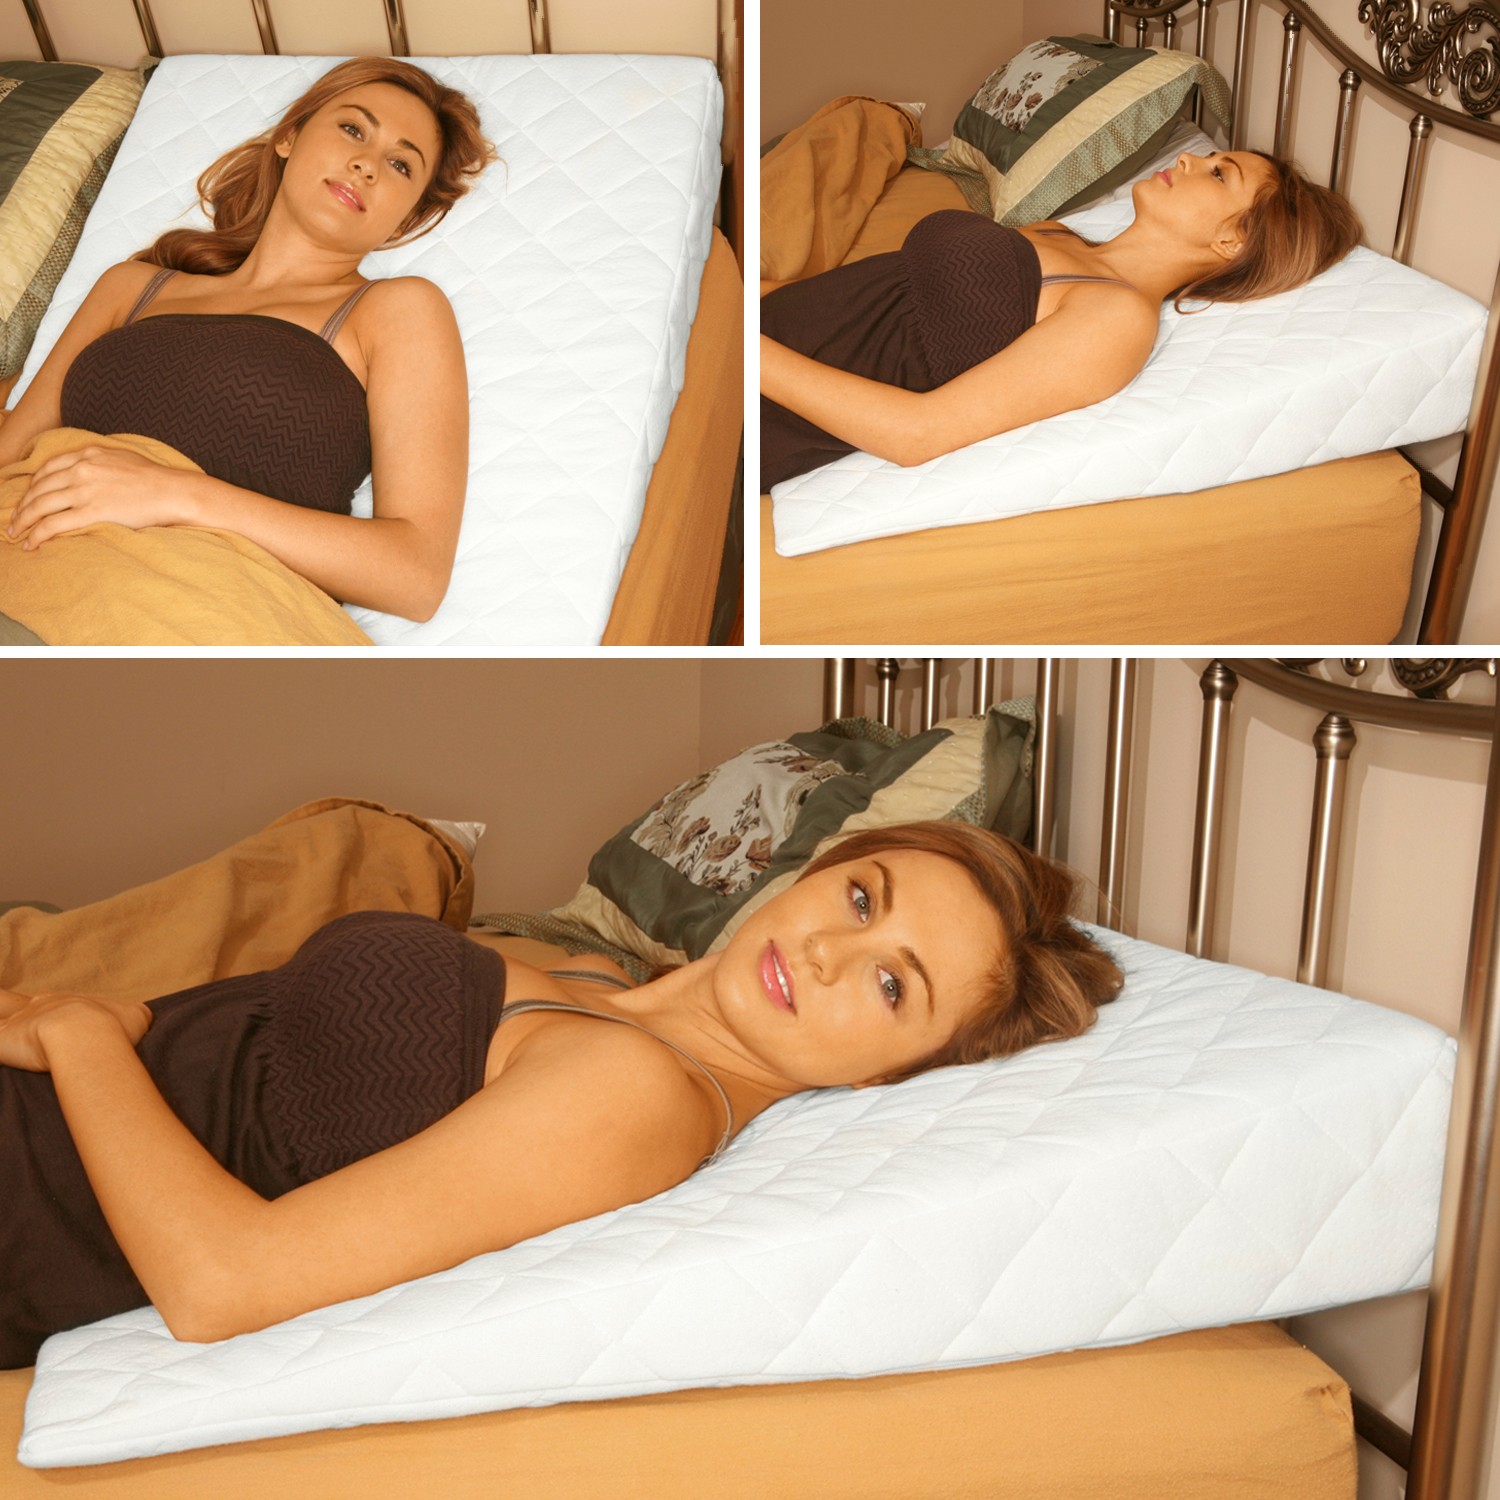 Top Sleeping Wedge Pillows To Help With Snoring and Heartburn